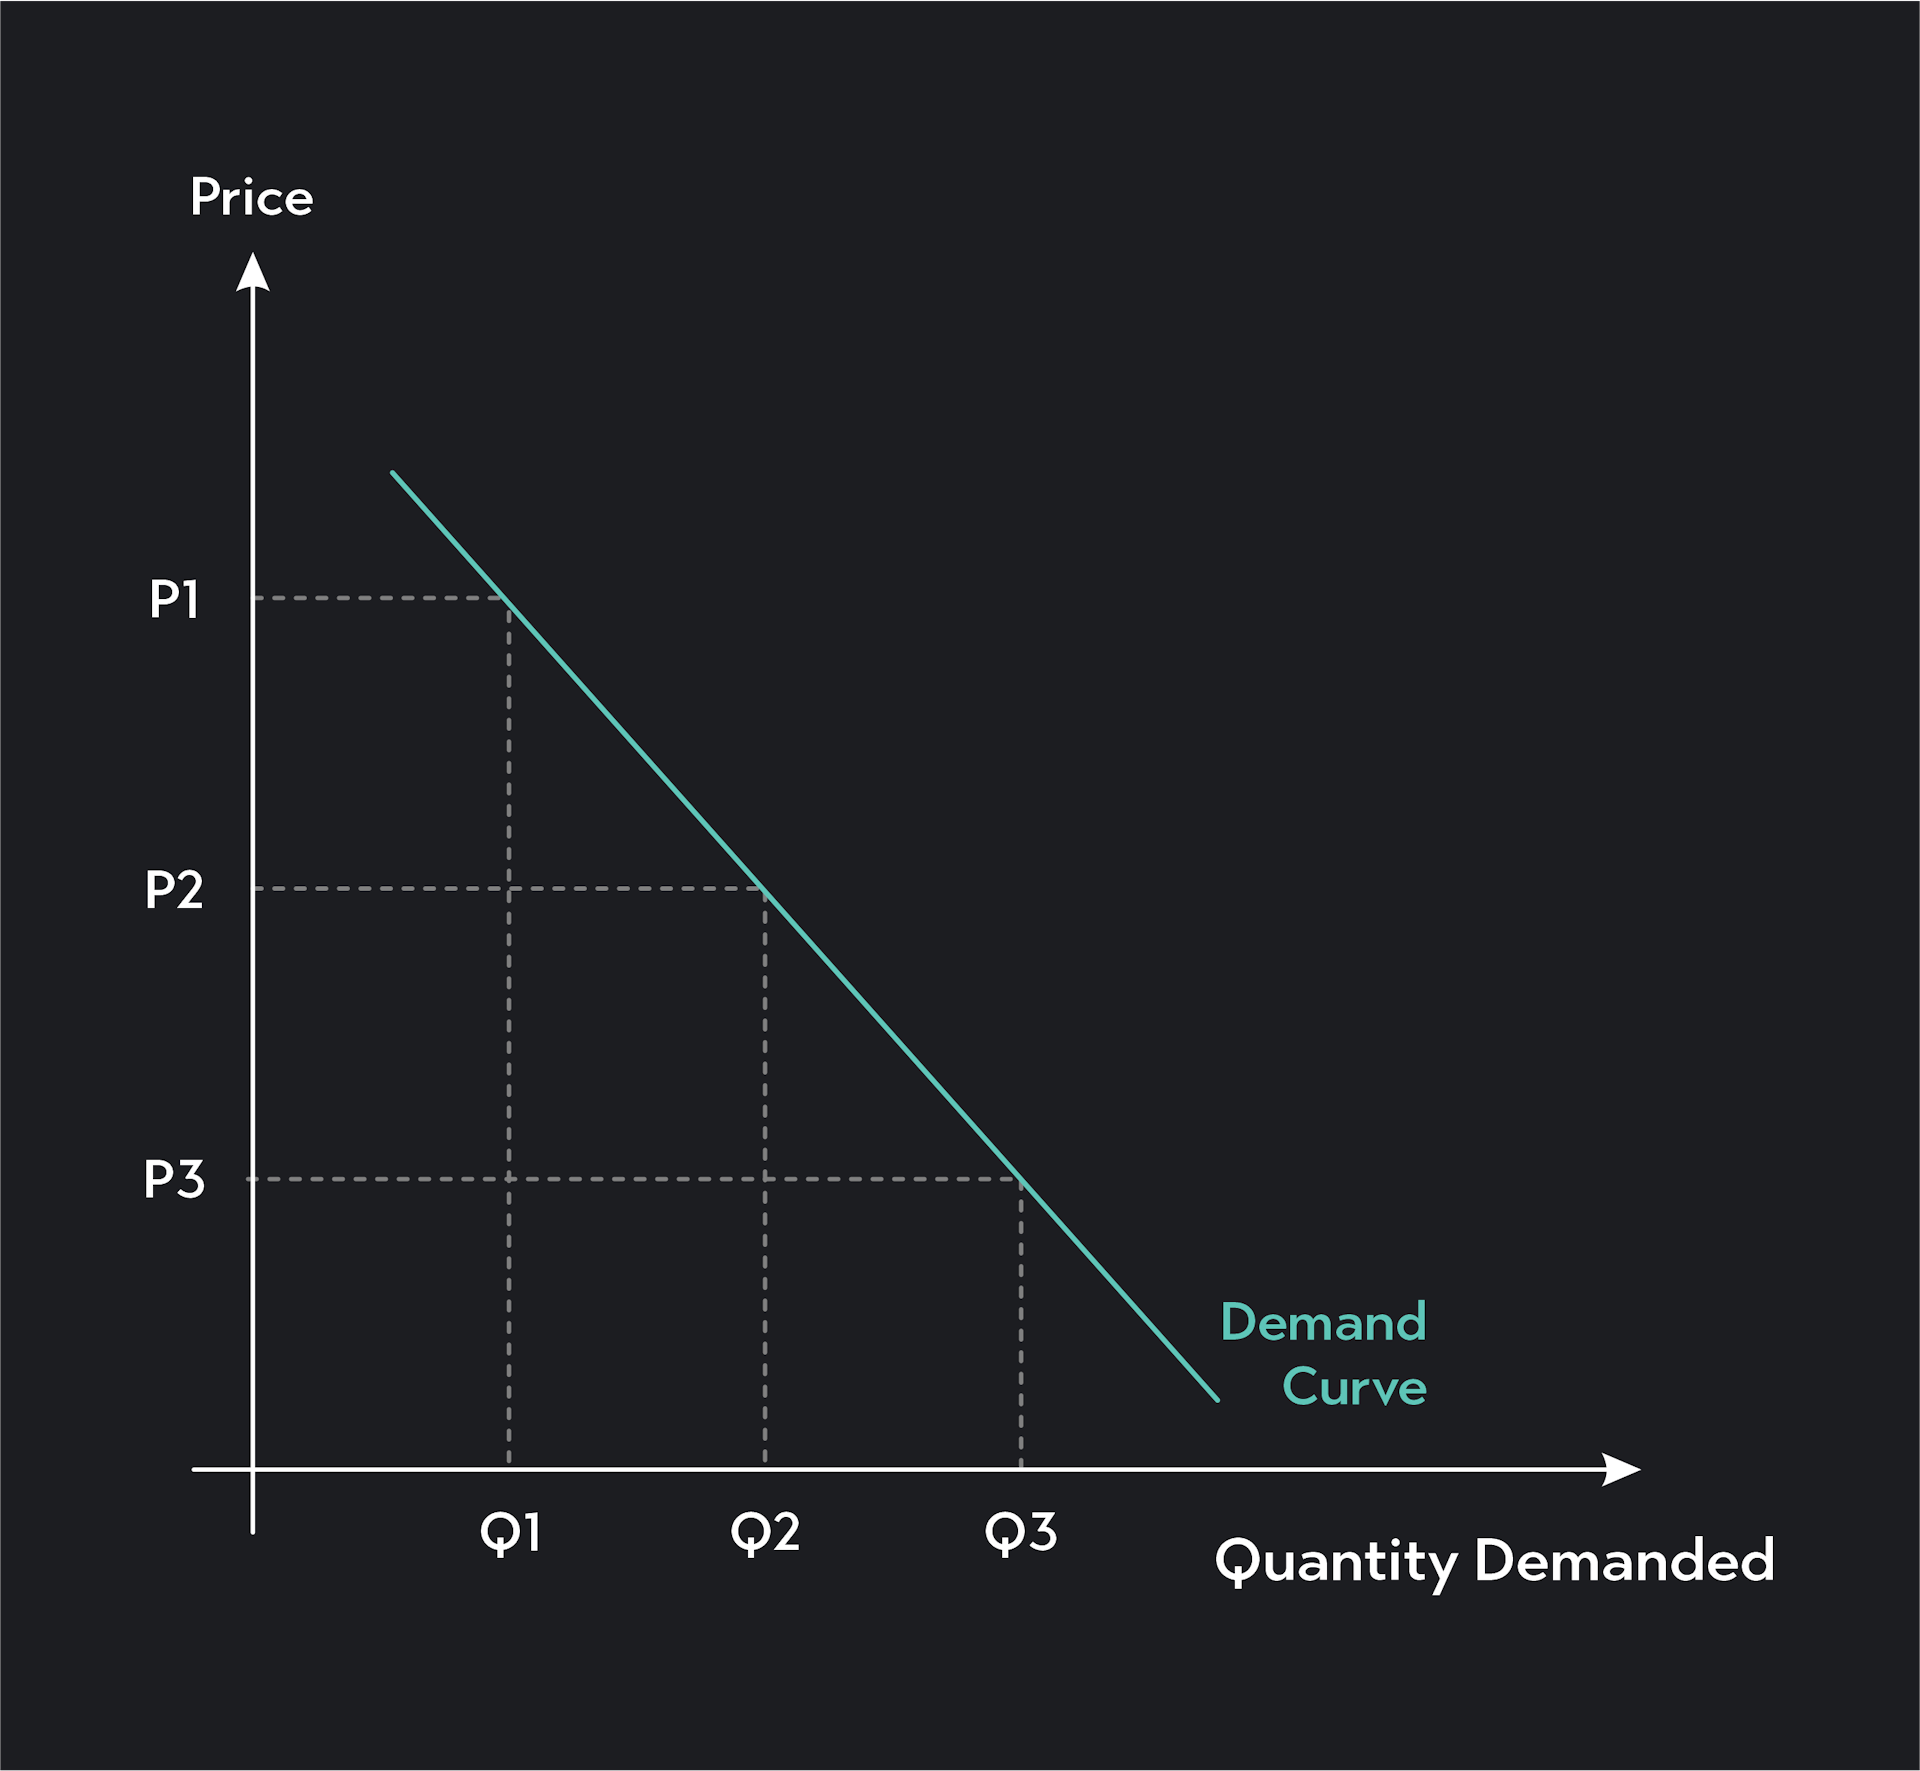 A demand curve graph showing consumers demand Q1 units of the good at price P1, Q2 units of the good at price P2, and so on.